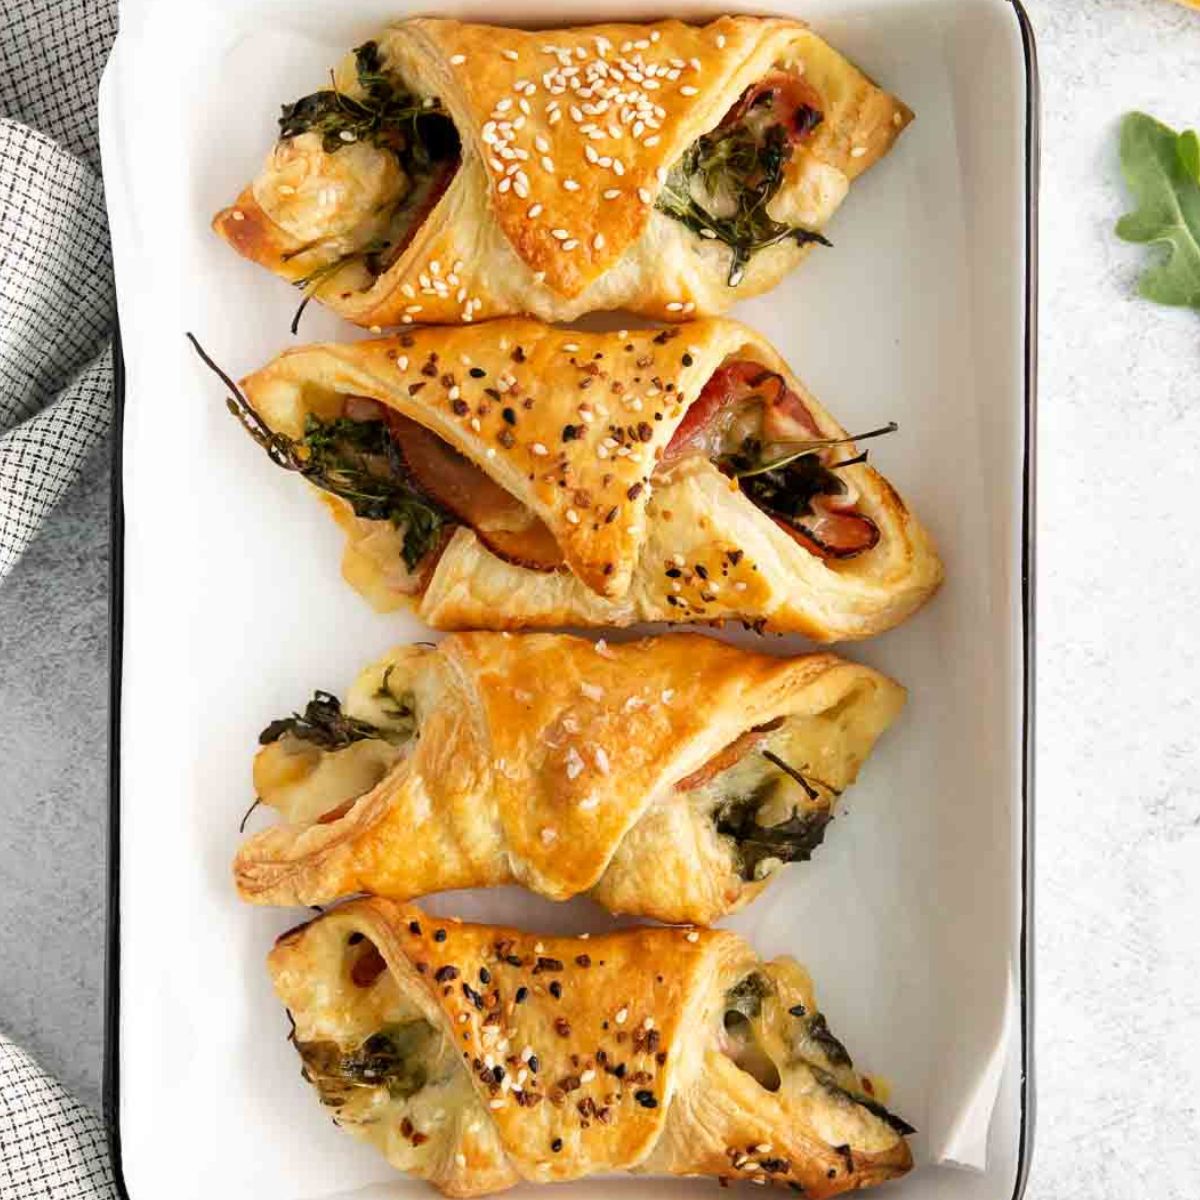 https://www.tosimplyinspire.com/wp-content/uploads/2022/06/ham-and-cheese-puff-pastry-1200x1200-1.jpeg